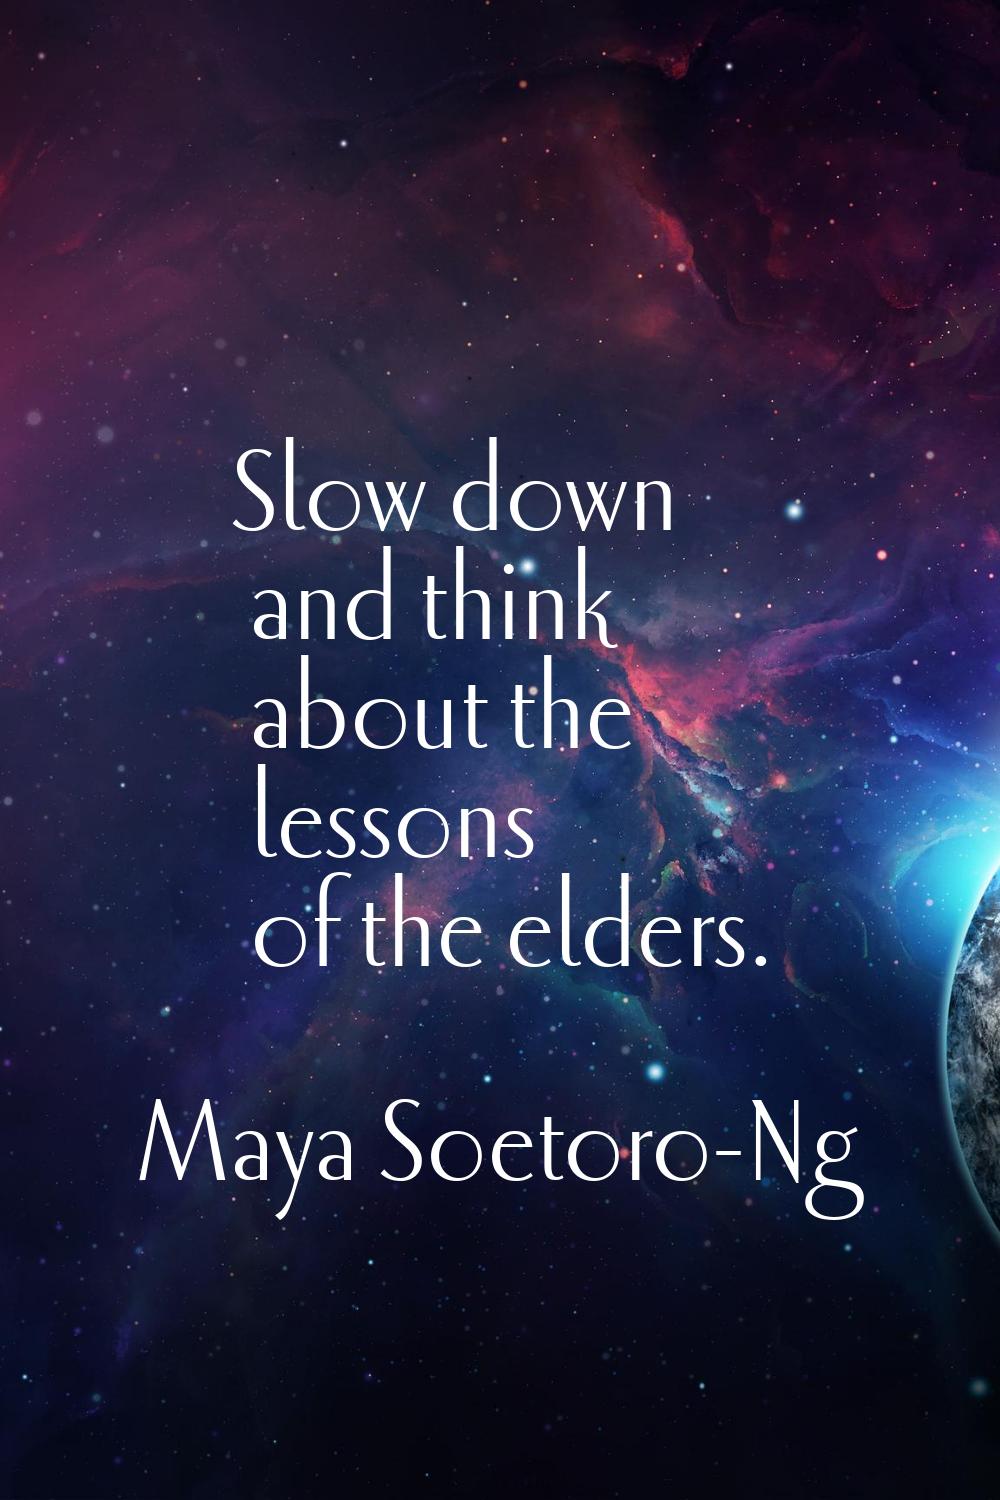 Slow down and think about the lessons of the elders.